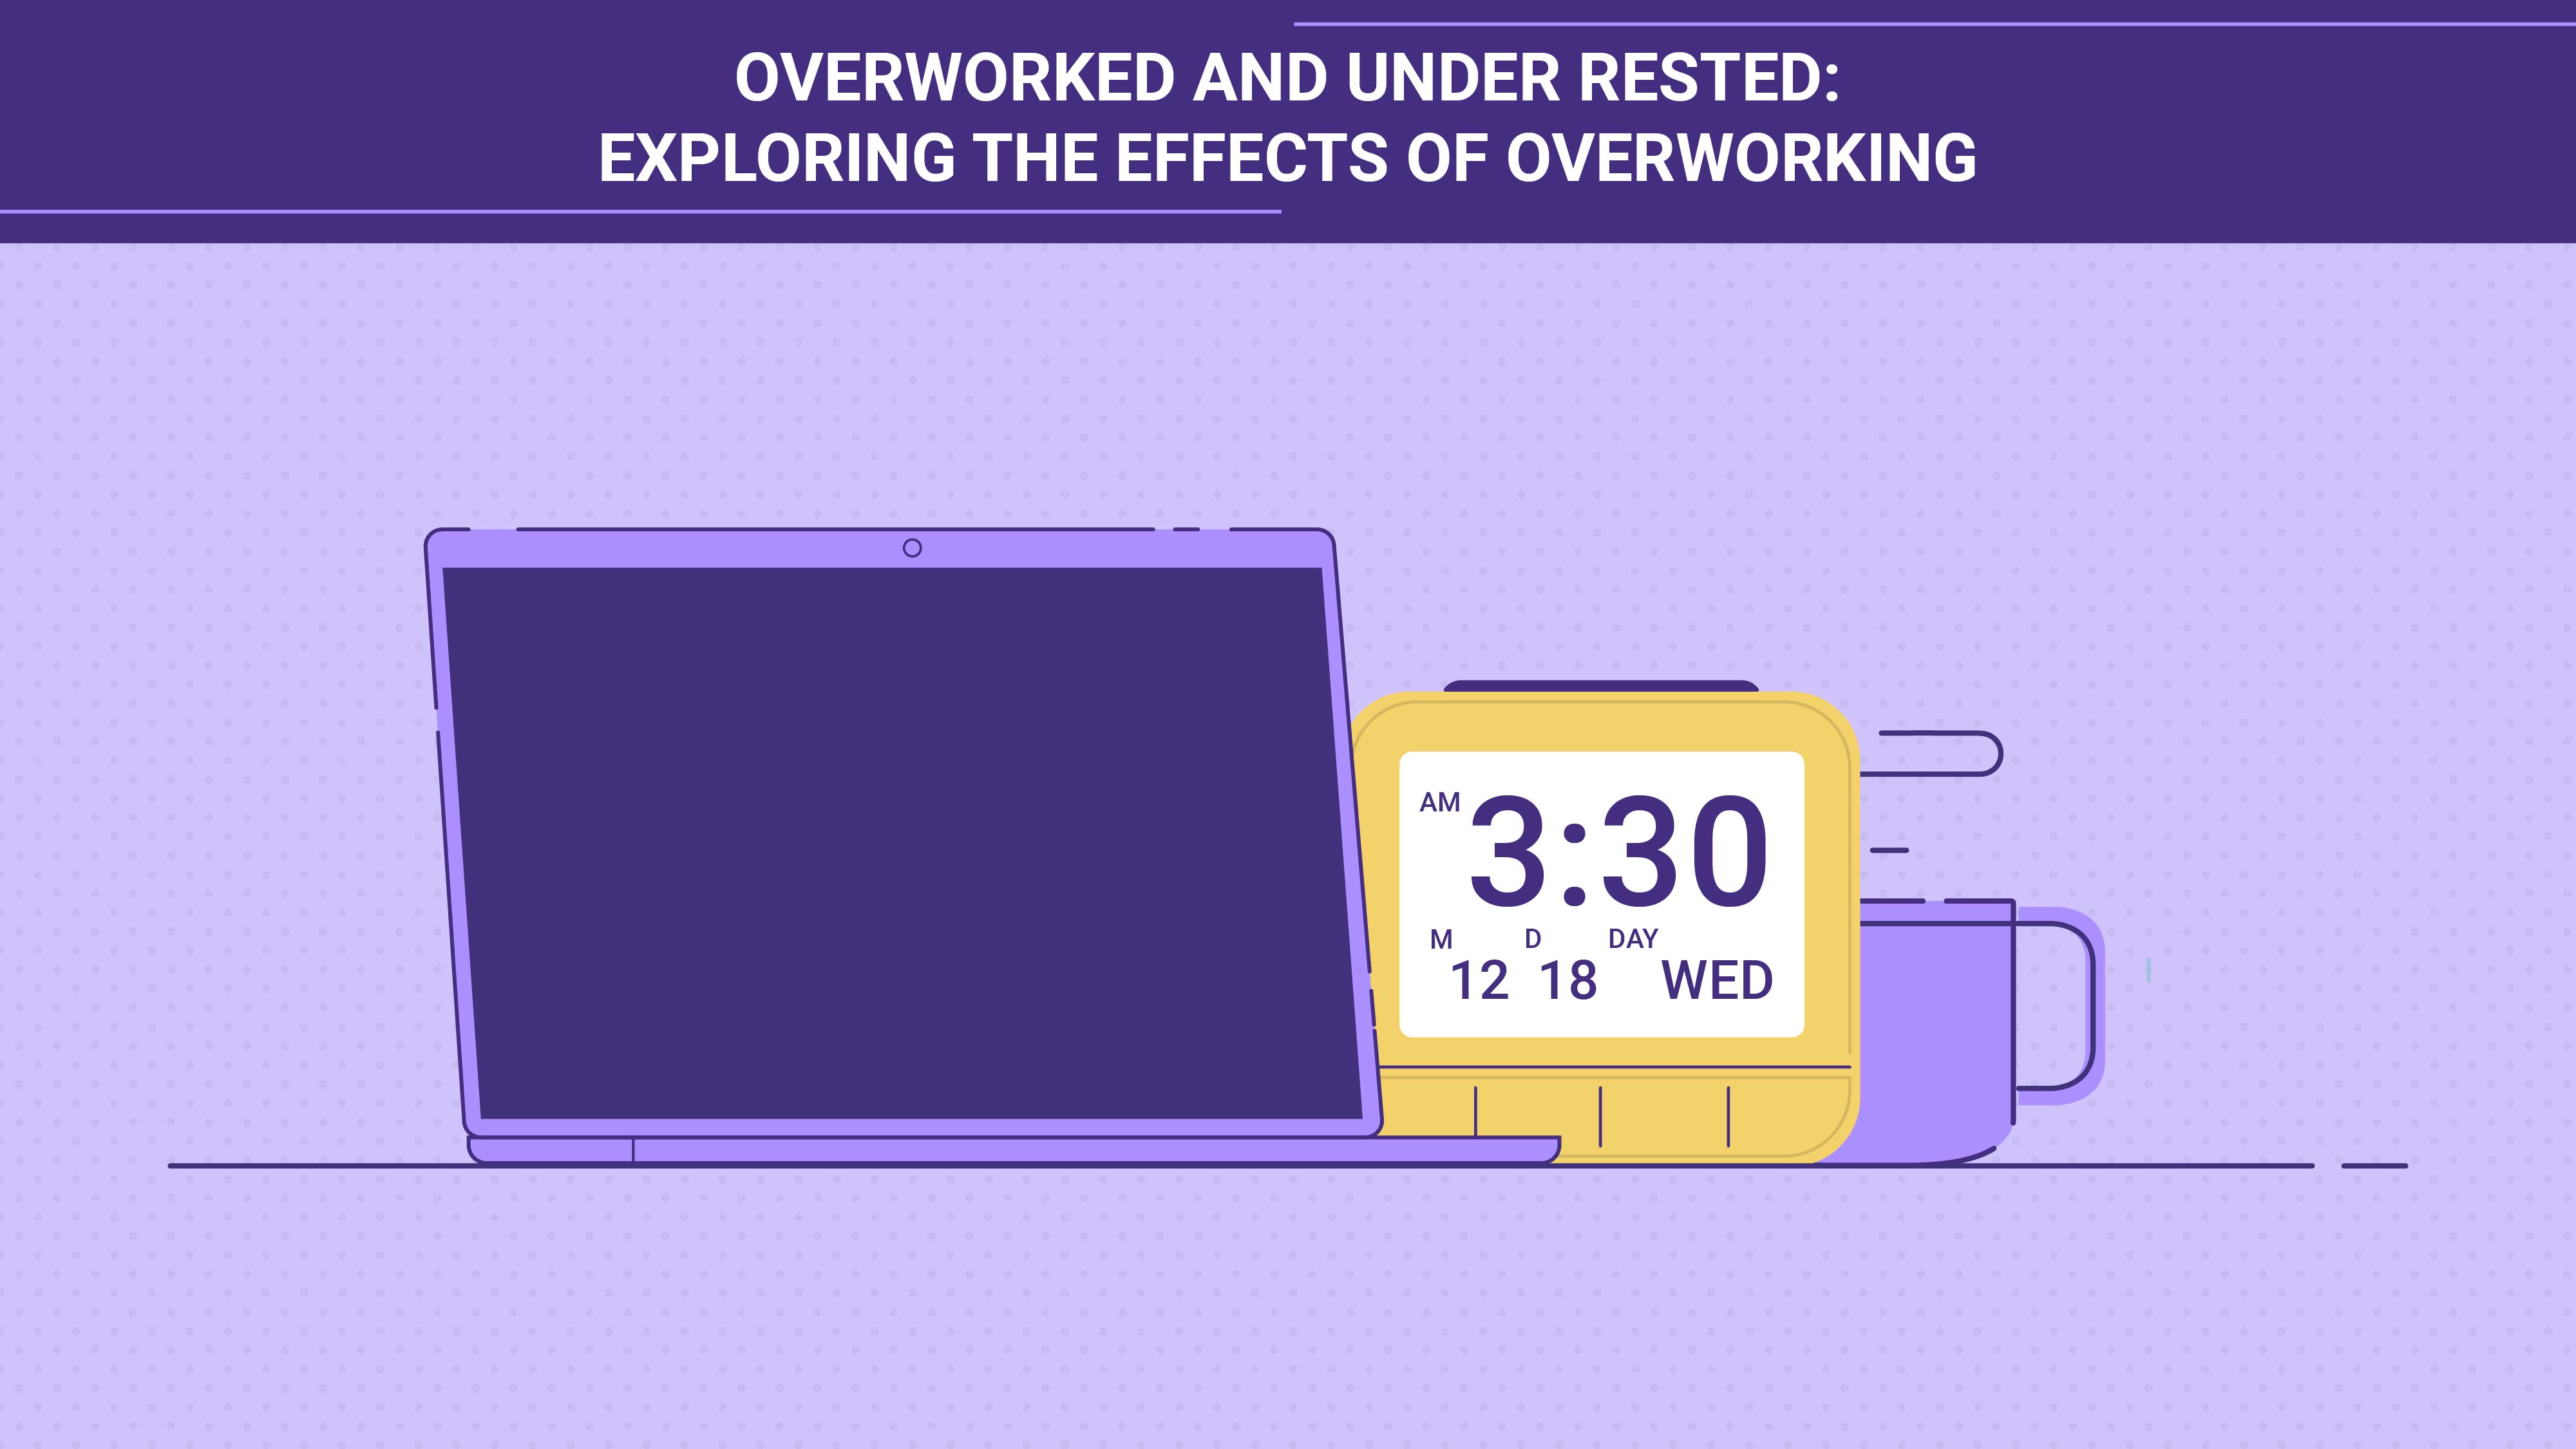 Overworked and Under Rested: Exploring the Effects of Overworking